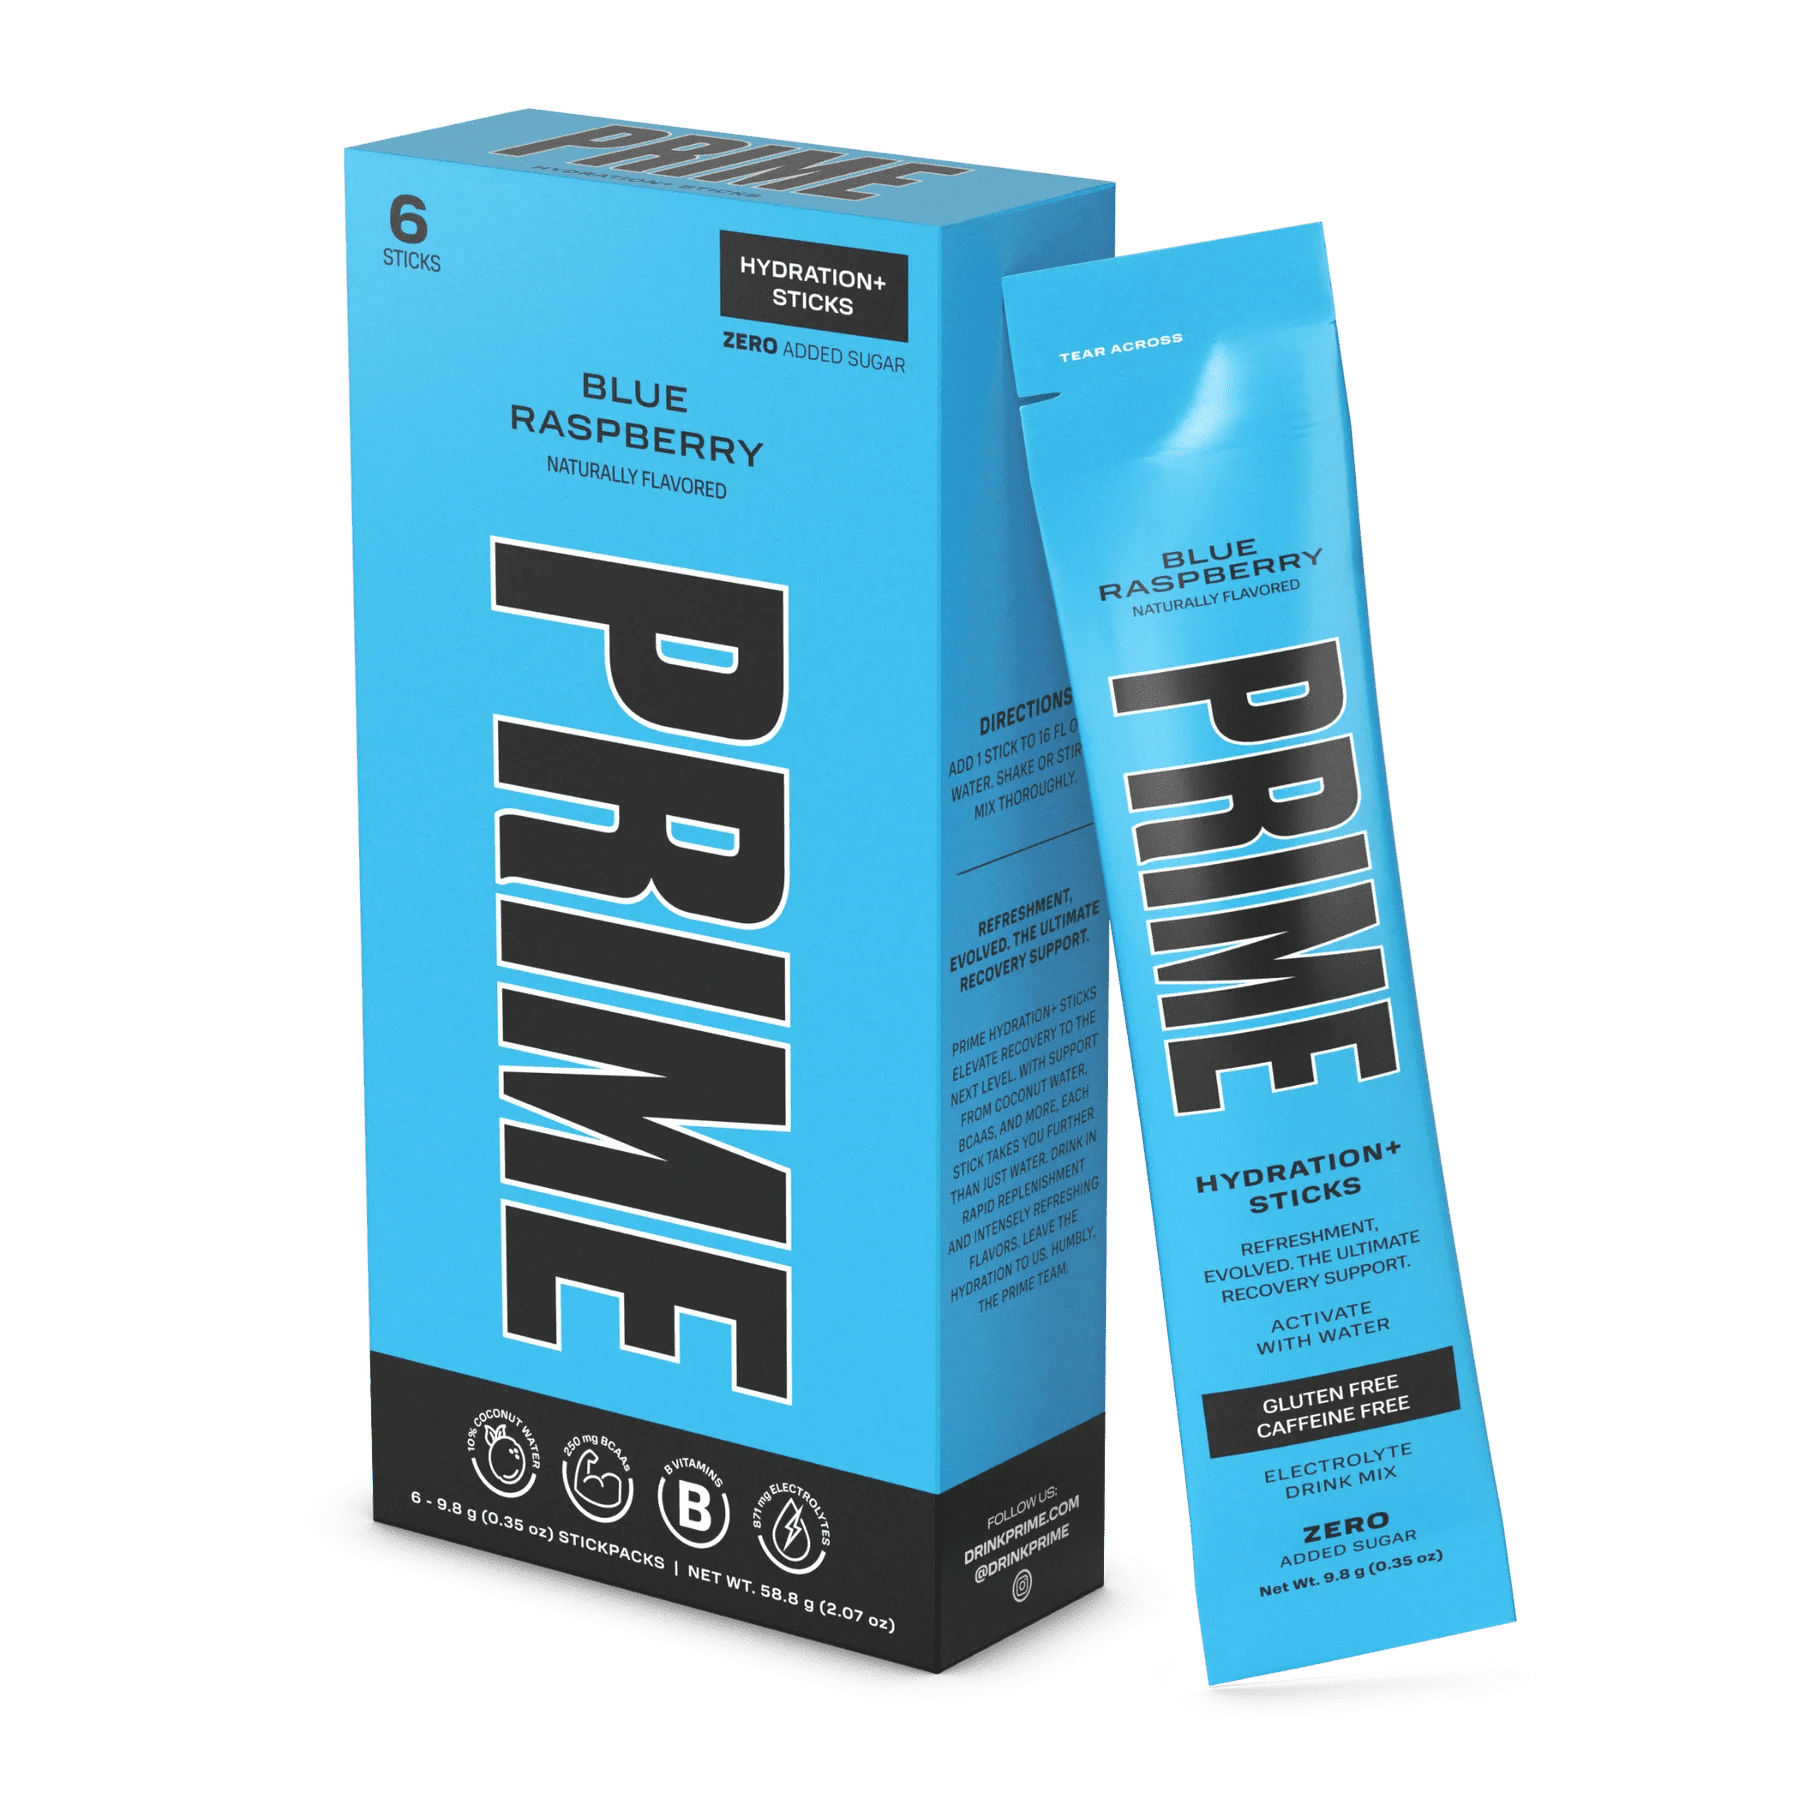 Prime Hydration + Powder Electrolyte Drink Mix - Variety Pack (20 Hydration  Sticks) by PRIME at the Vitamin Shoppe